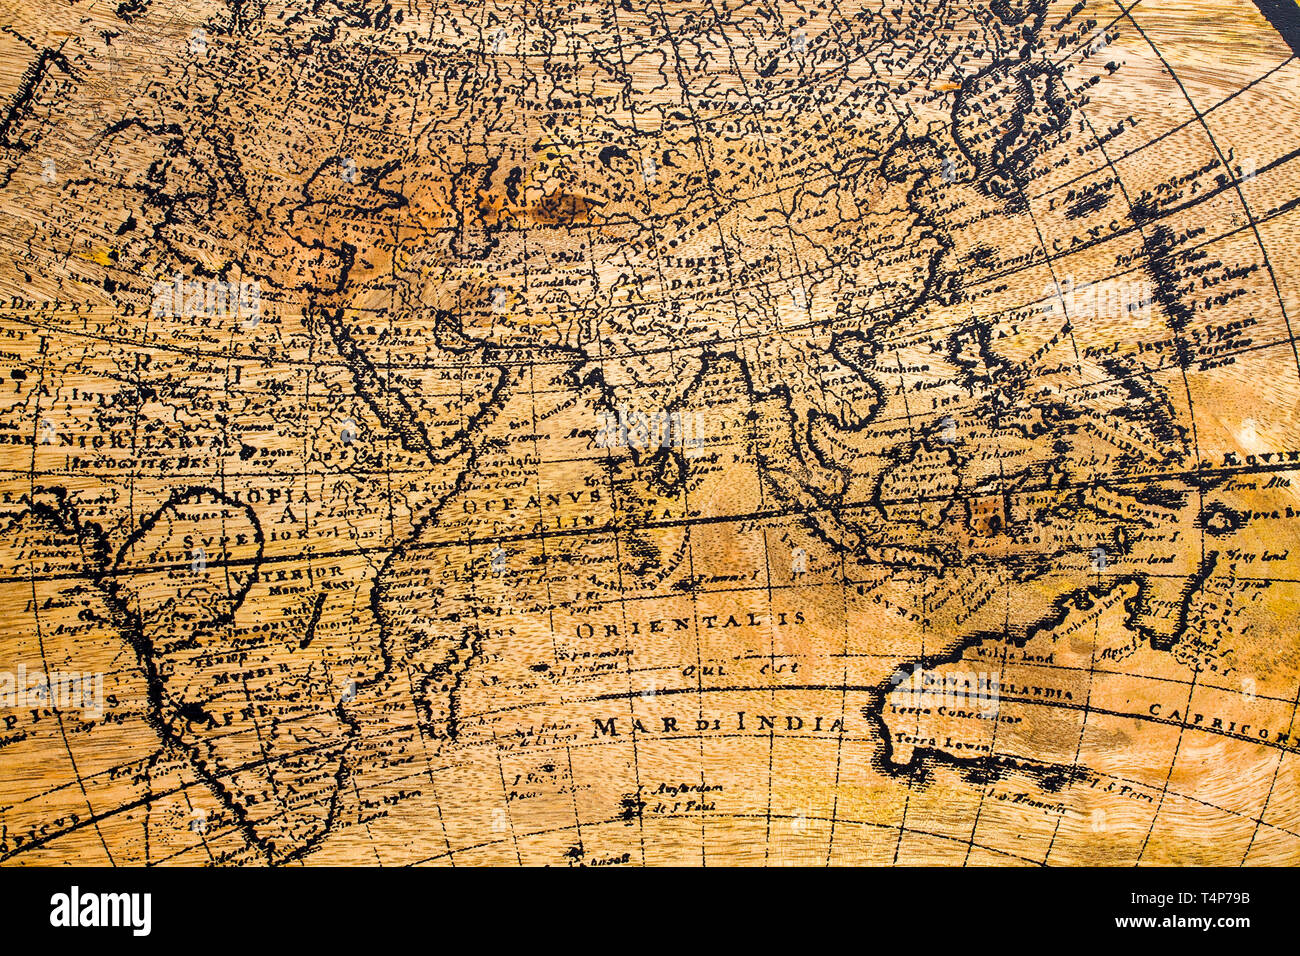 Old Geographic map of the world printed on a wooden board Stock Photo